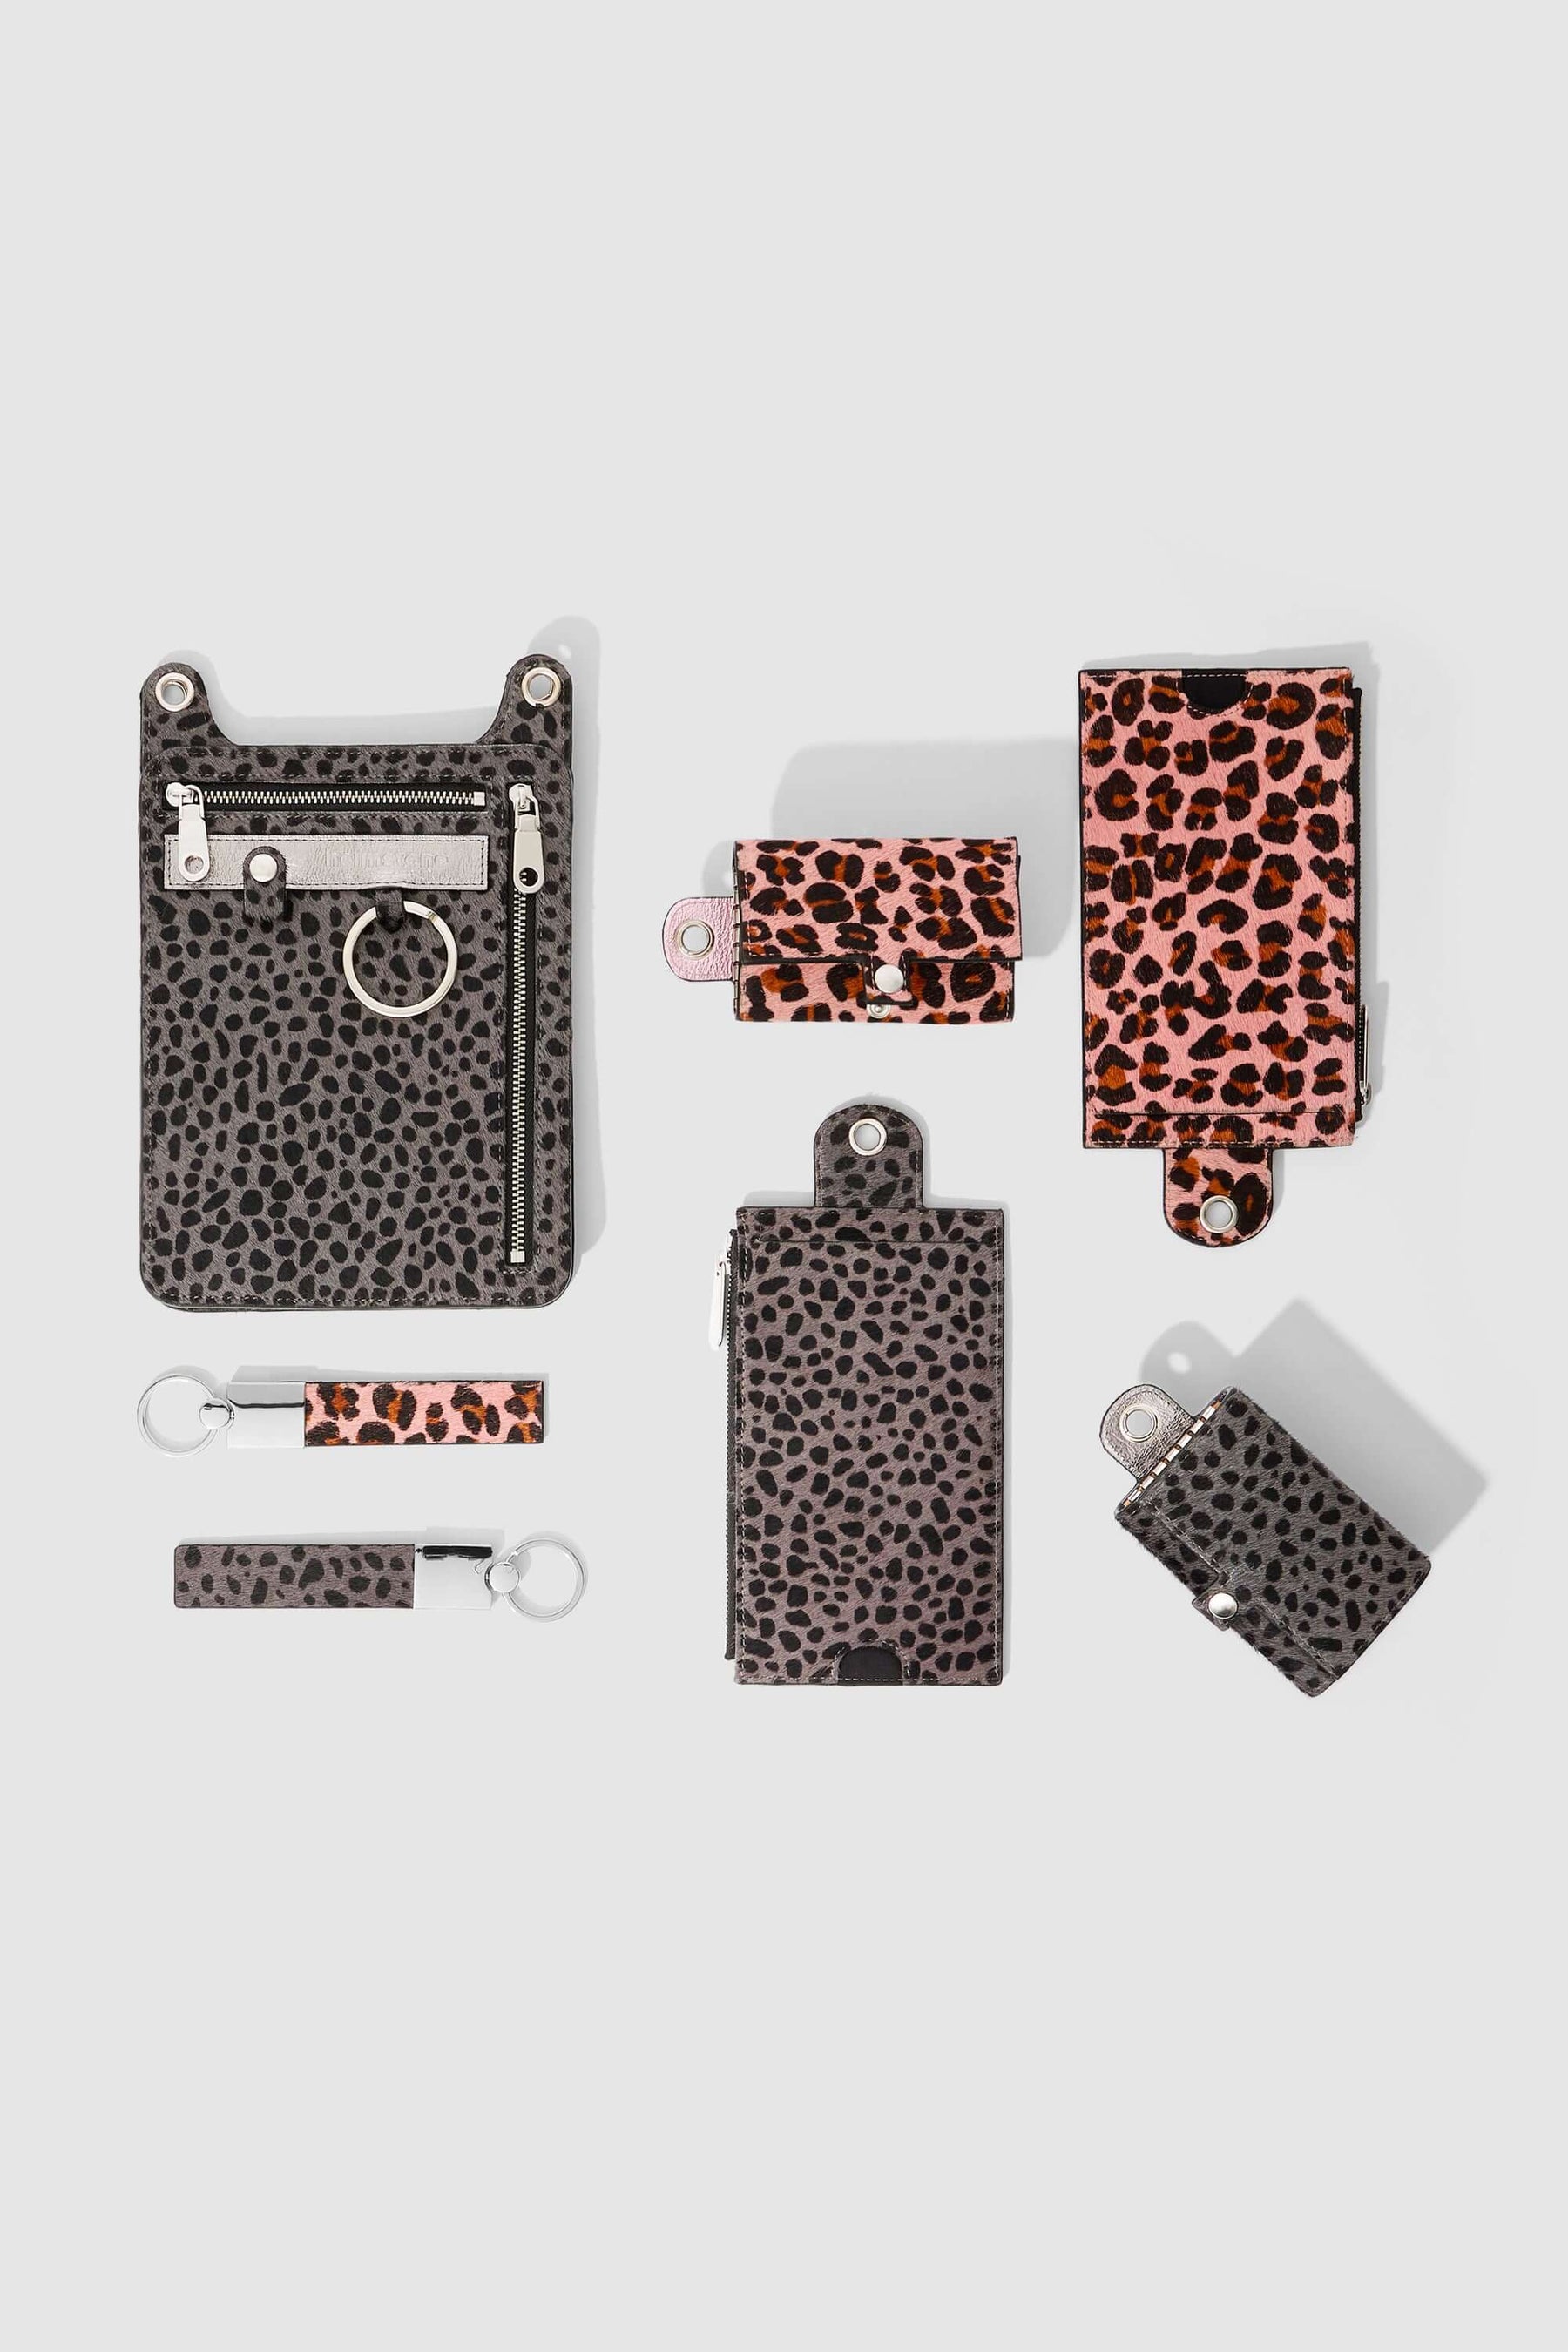 The Minis - Key holder in grey Cheetah printed leather